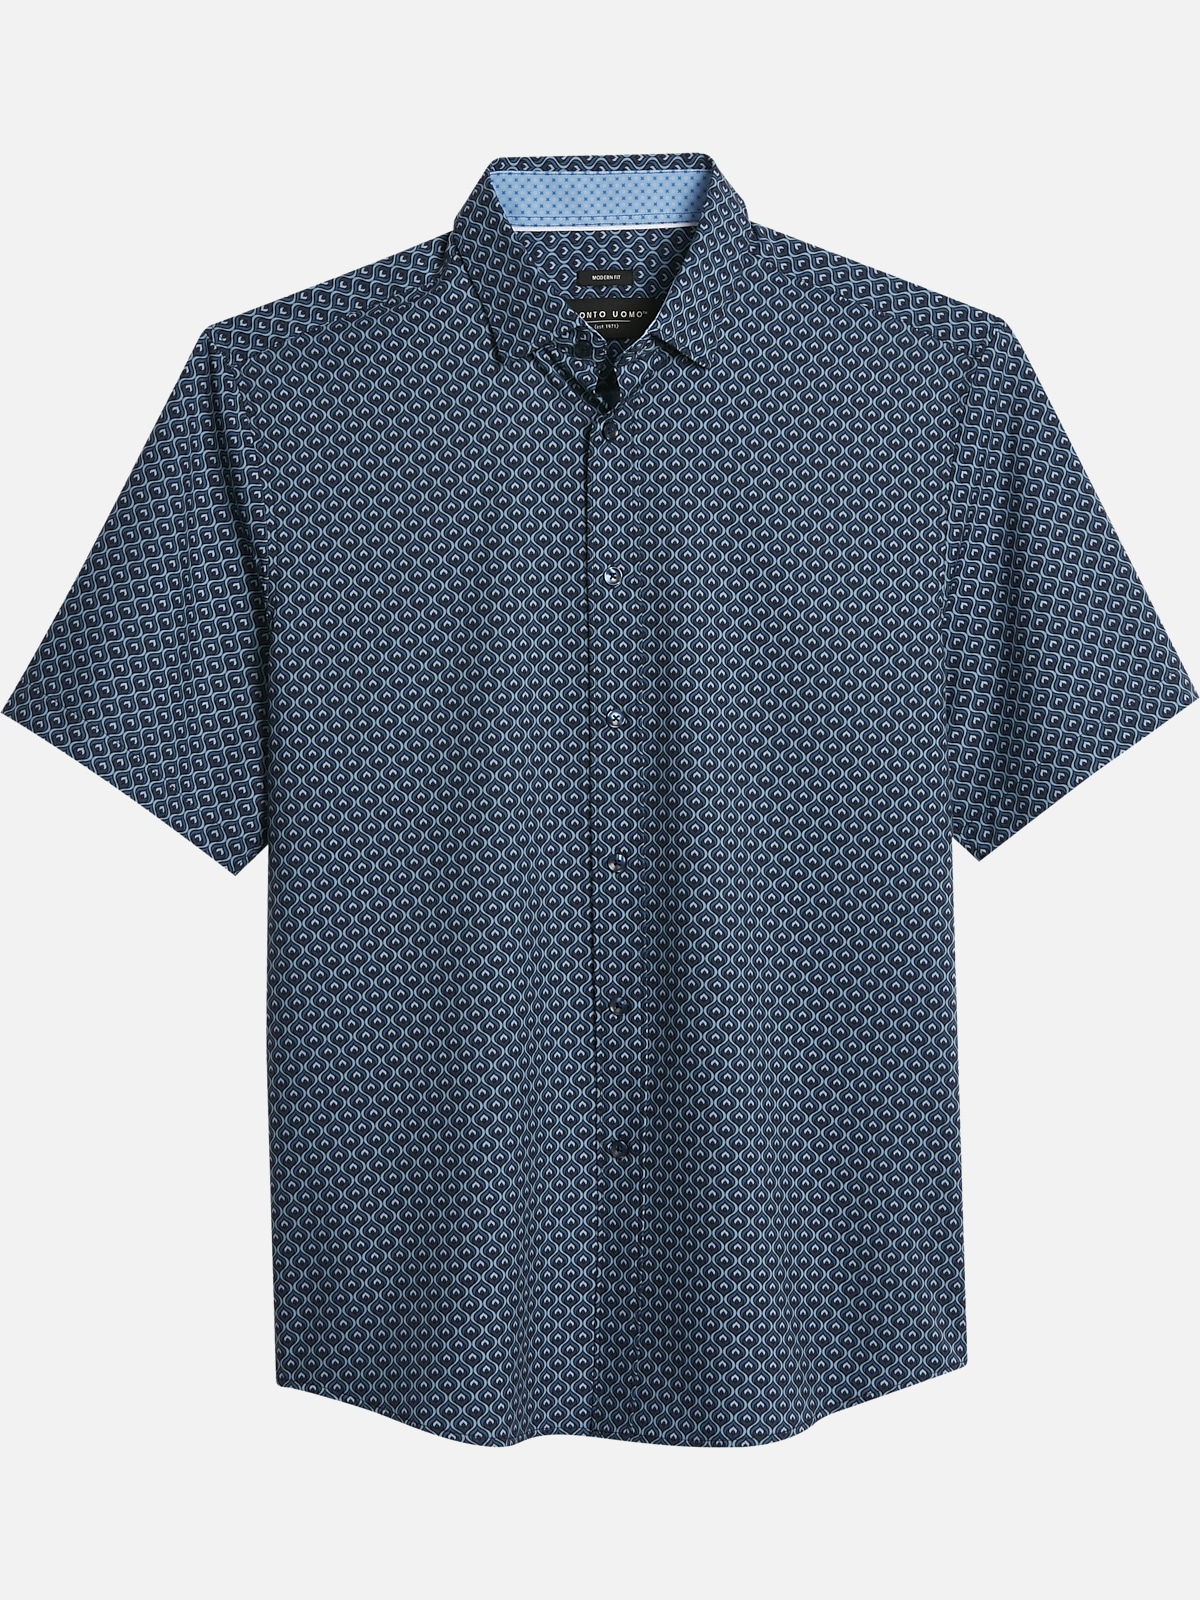 Pronto Uomo Modern Fit Moroccan Tile Short Sleeve Sport Shirt | All ...